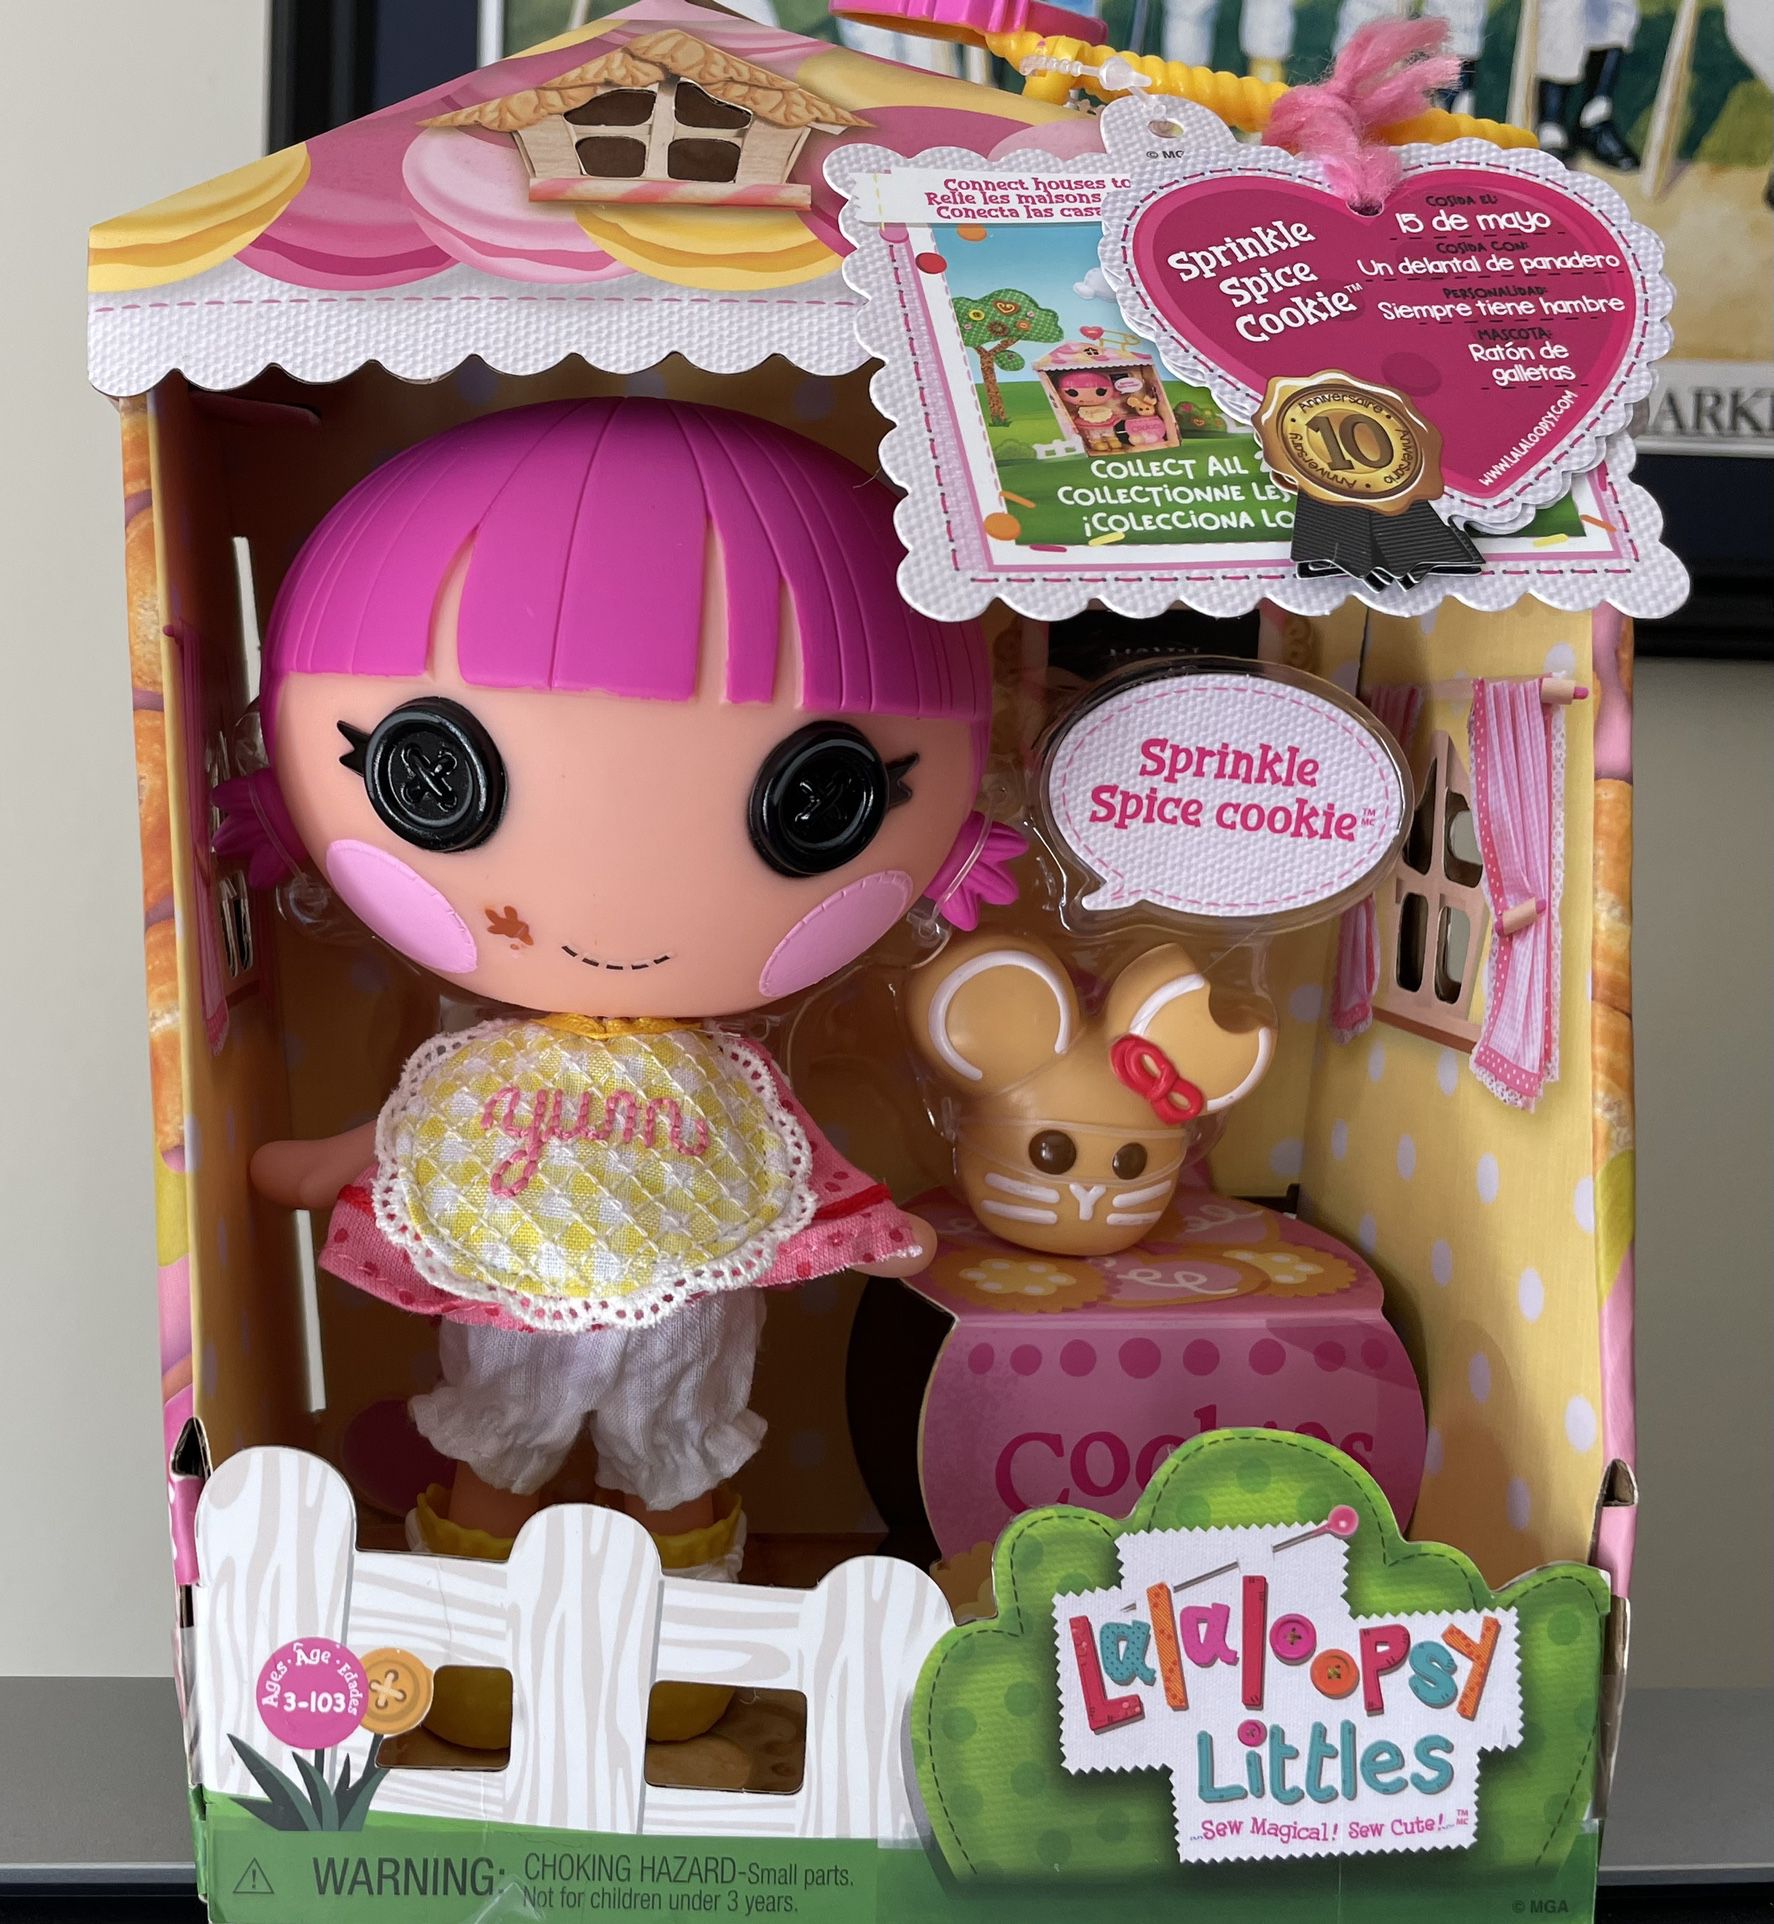 Christmas countdown Lalaloopsy Sprinkle Spice Cookie Littles Doll $8 Each And 3 For $21 